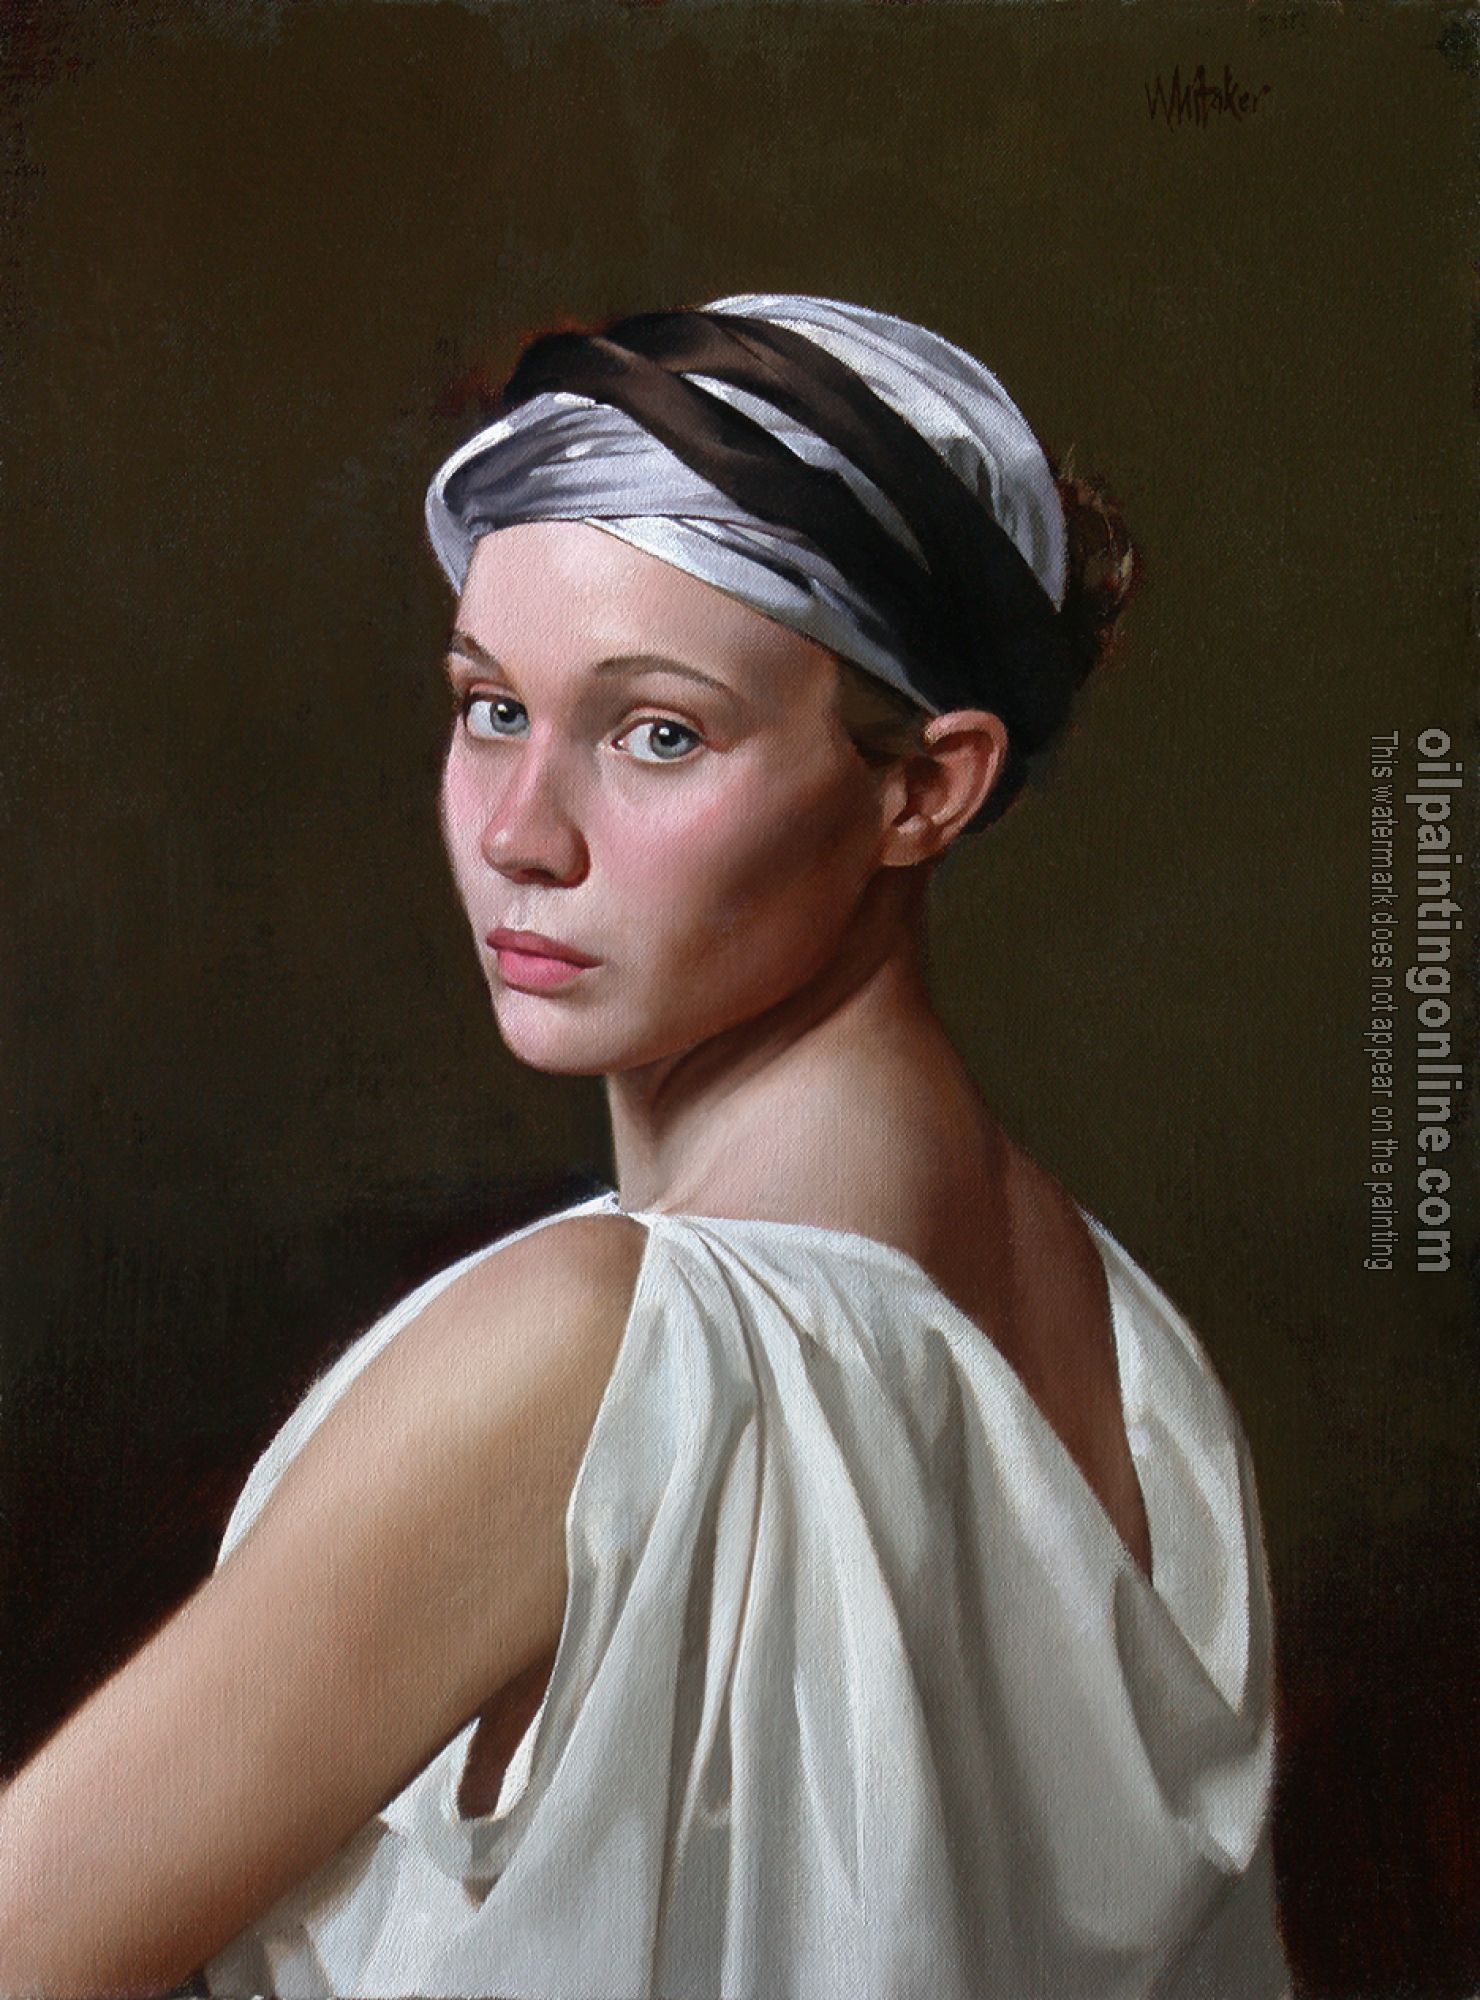 William Whitaker - Young Woman